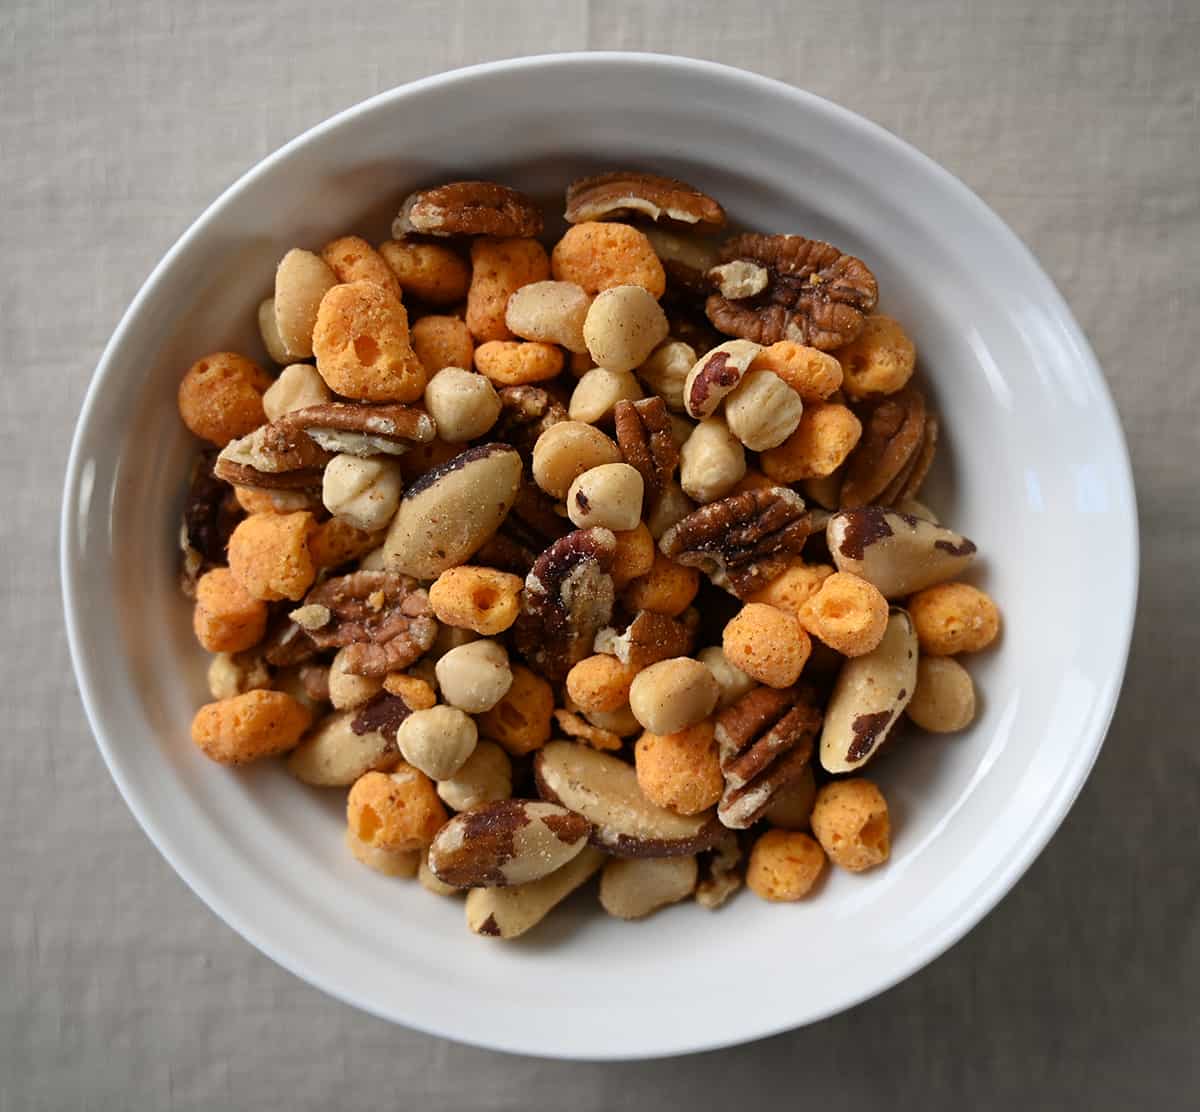 Top down image of a bowl of keto snack mix.